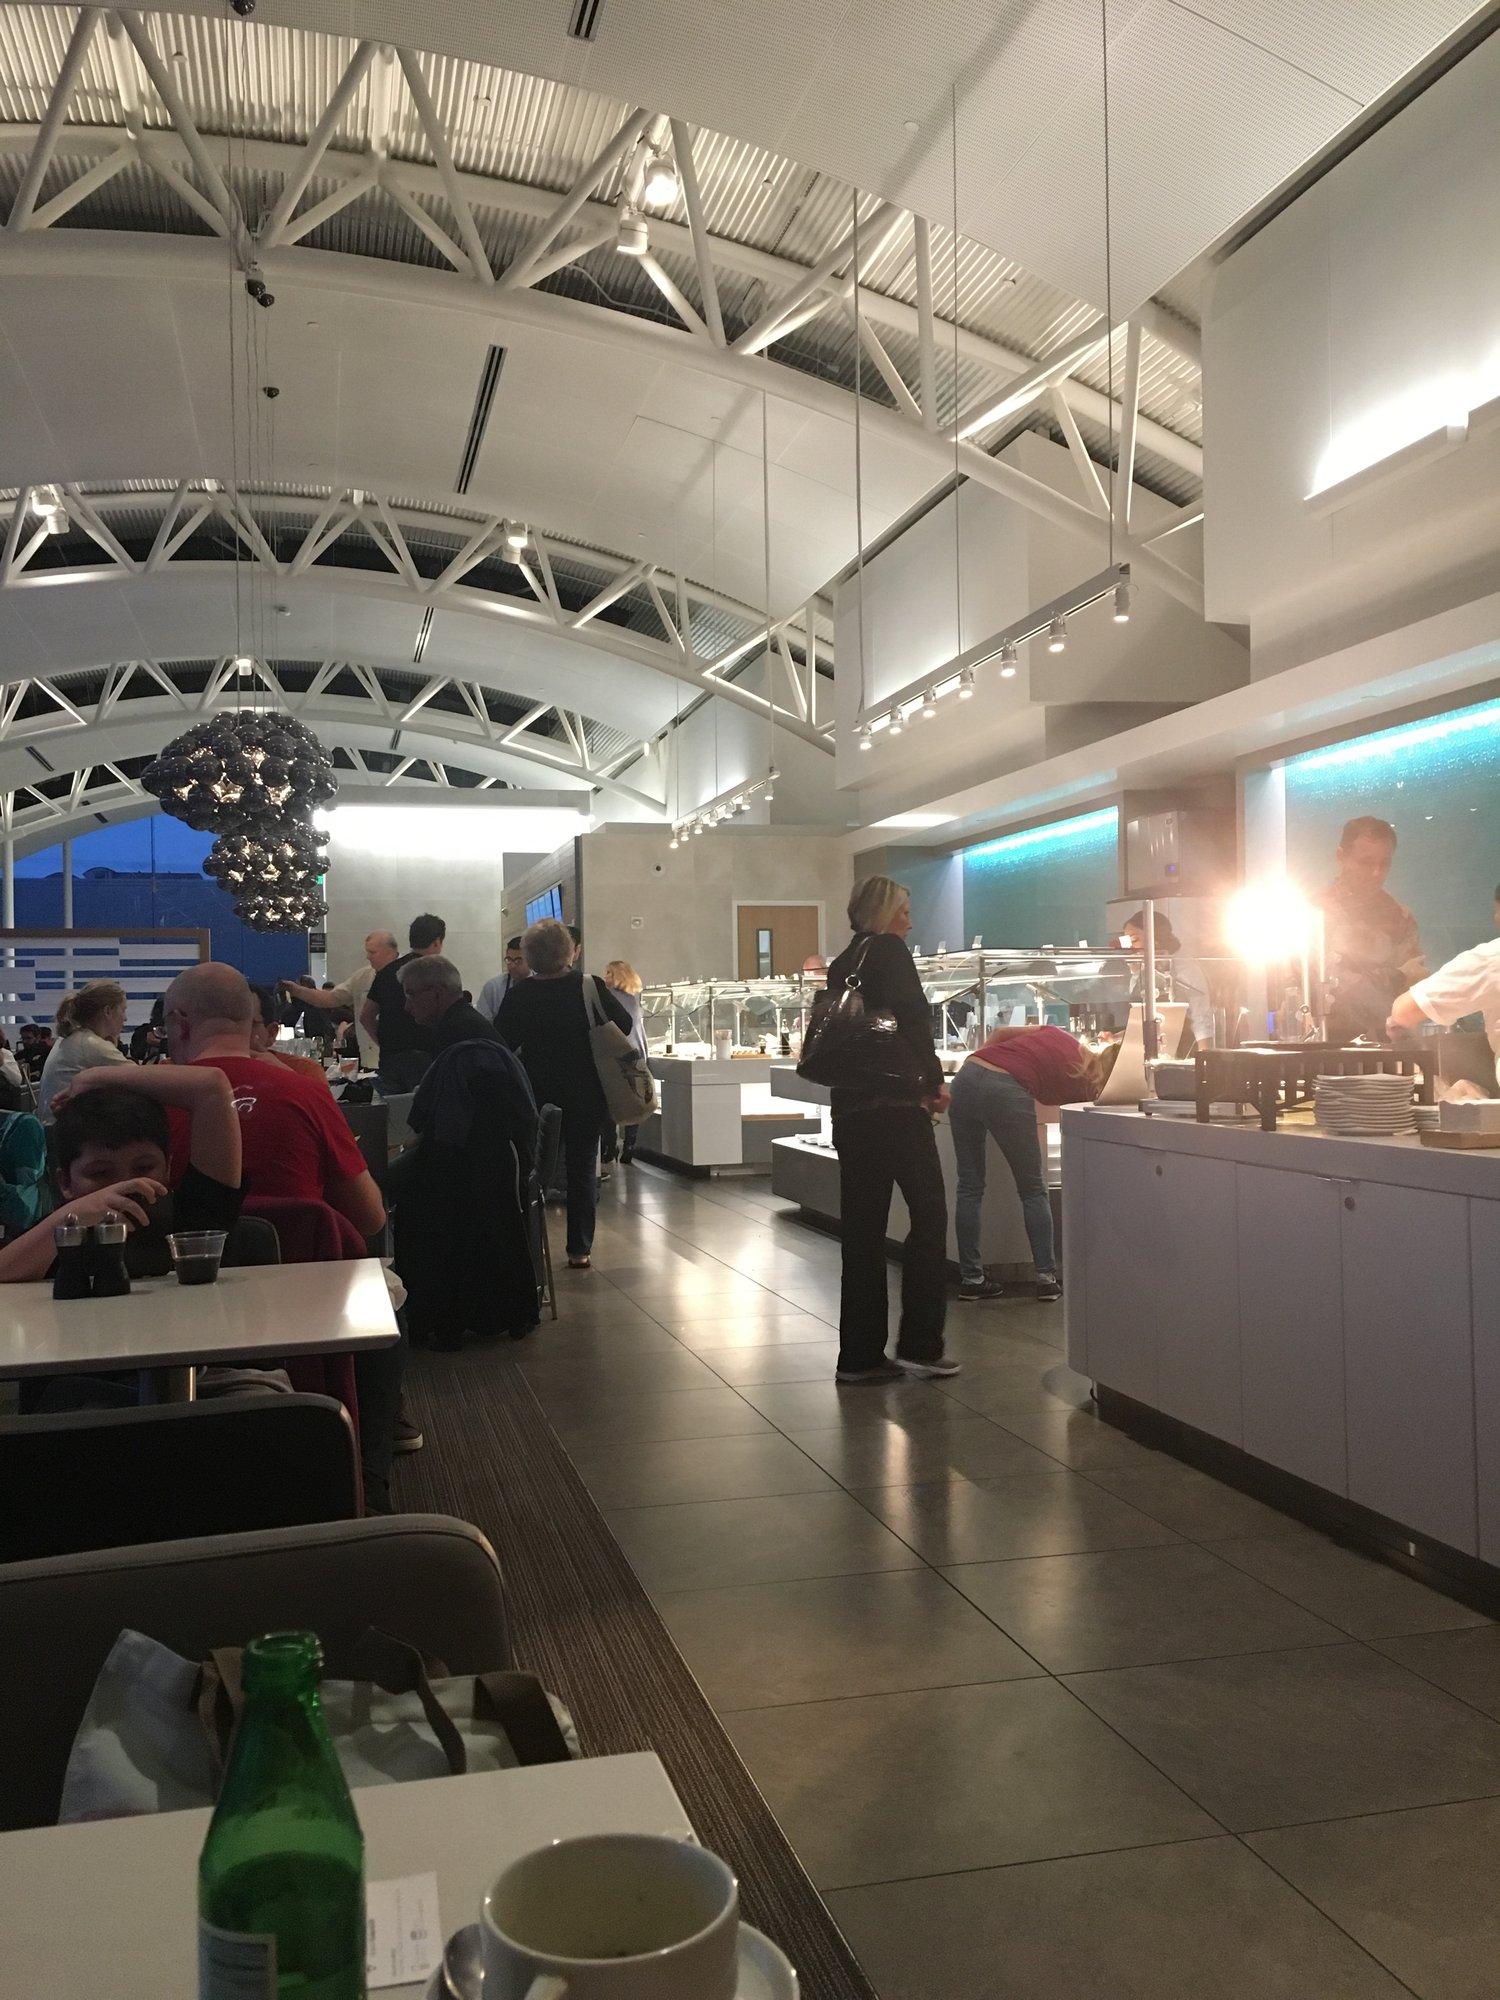 American Airlines Admirals Club image 8 of 17